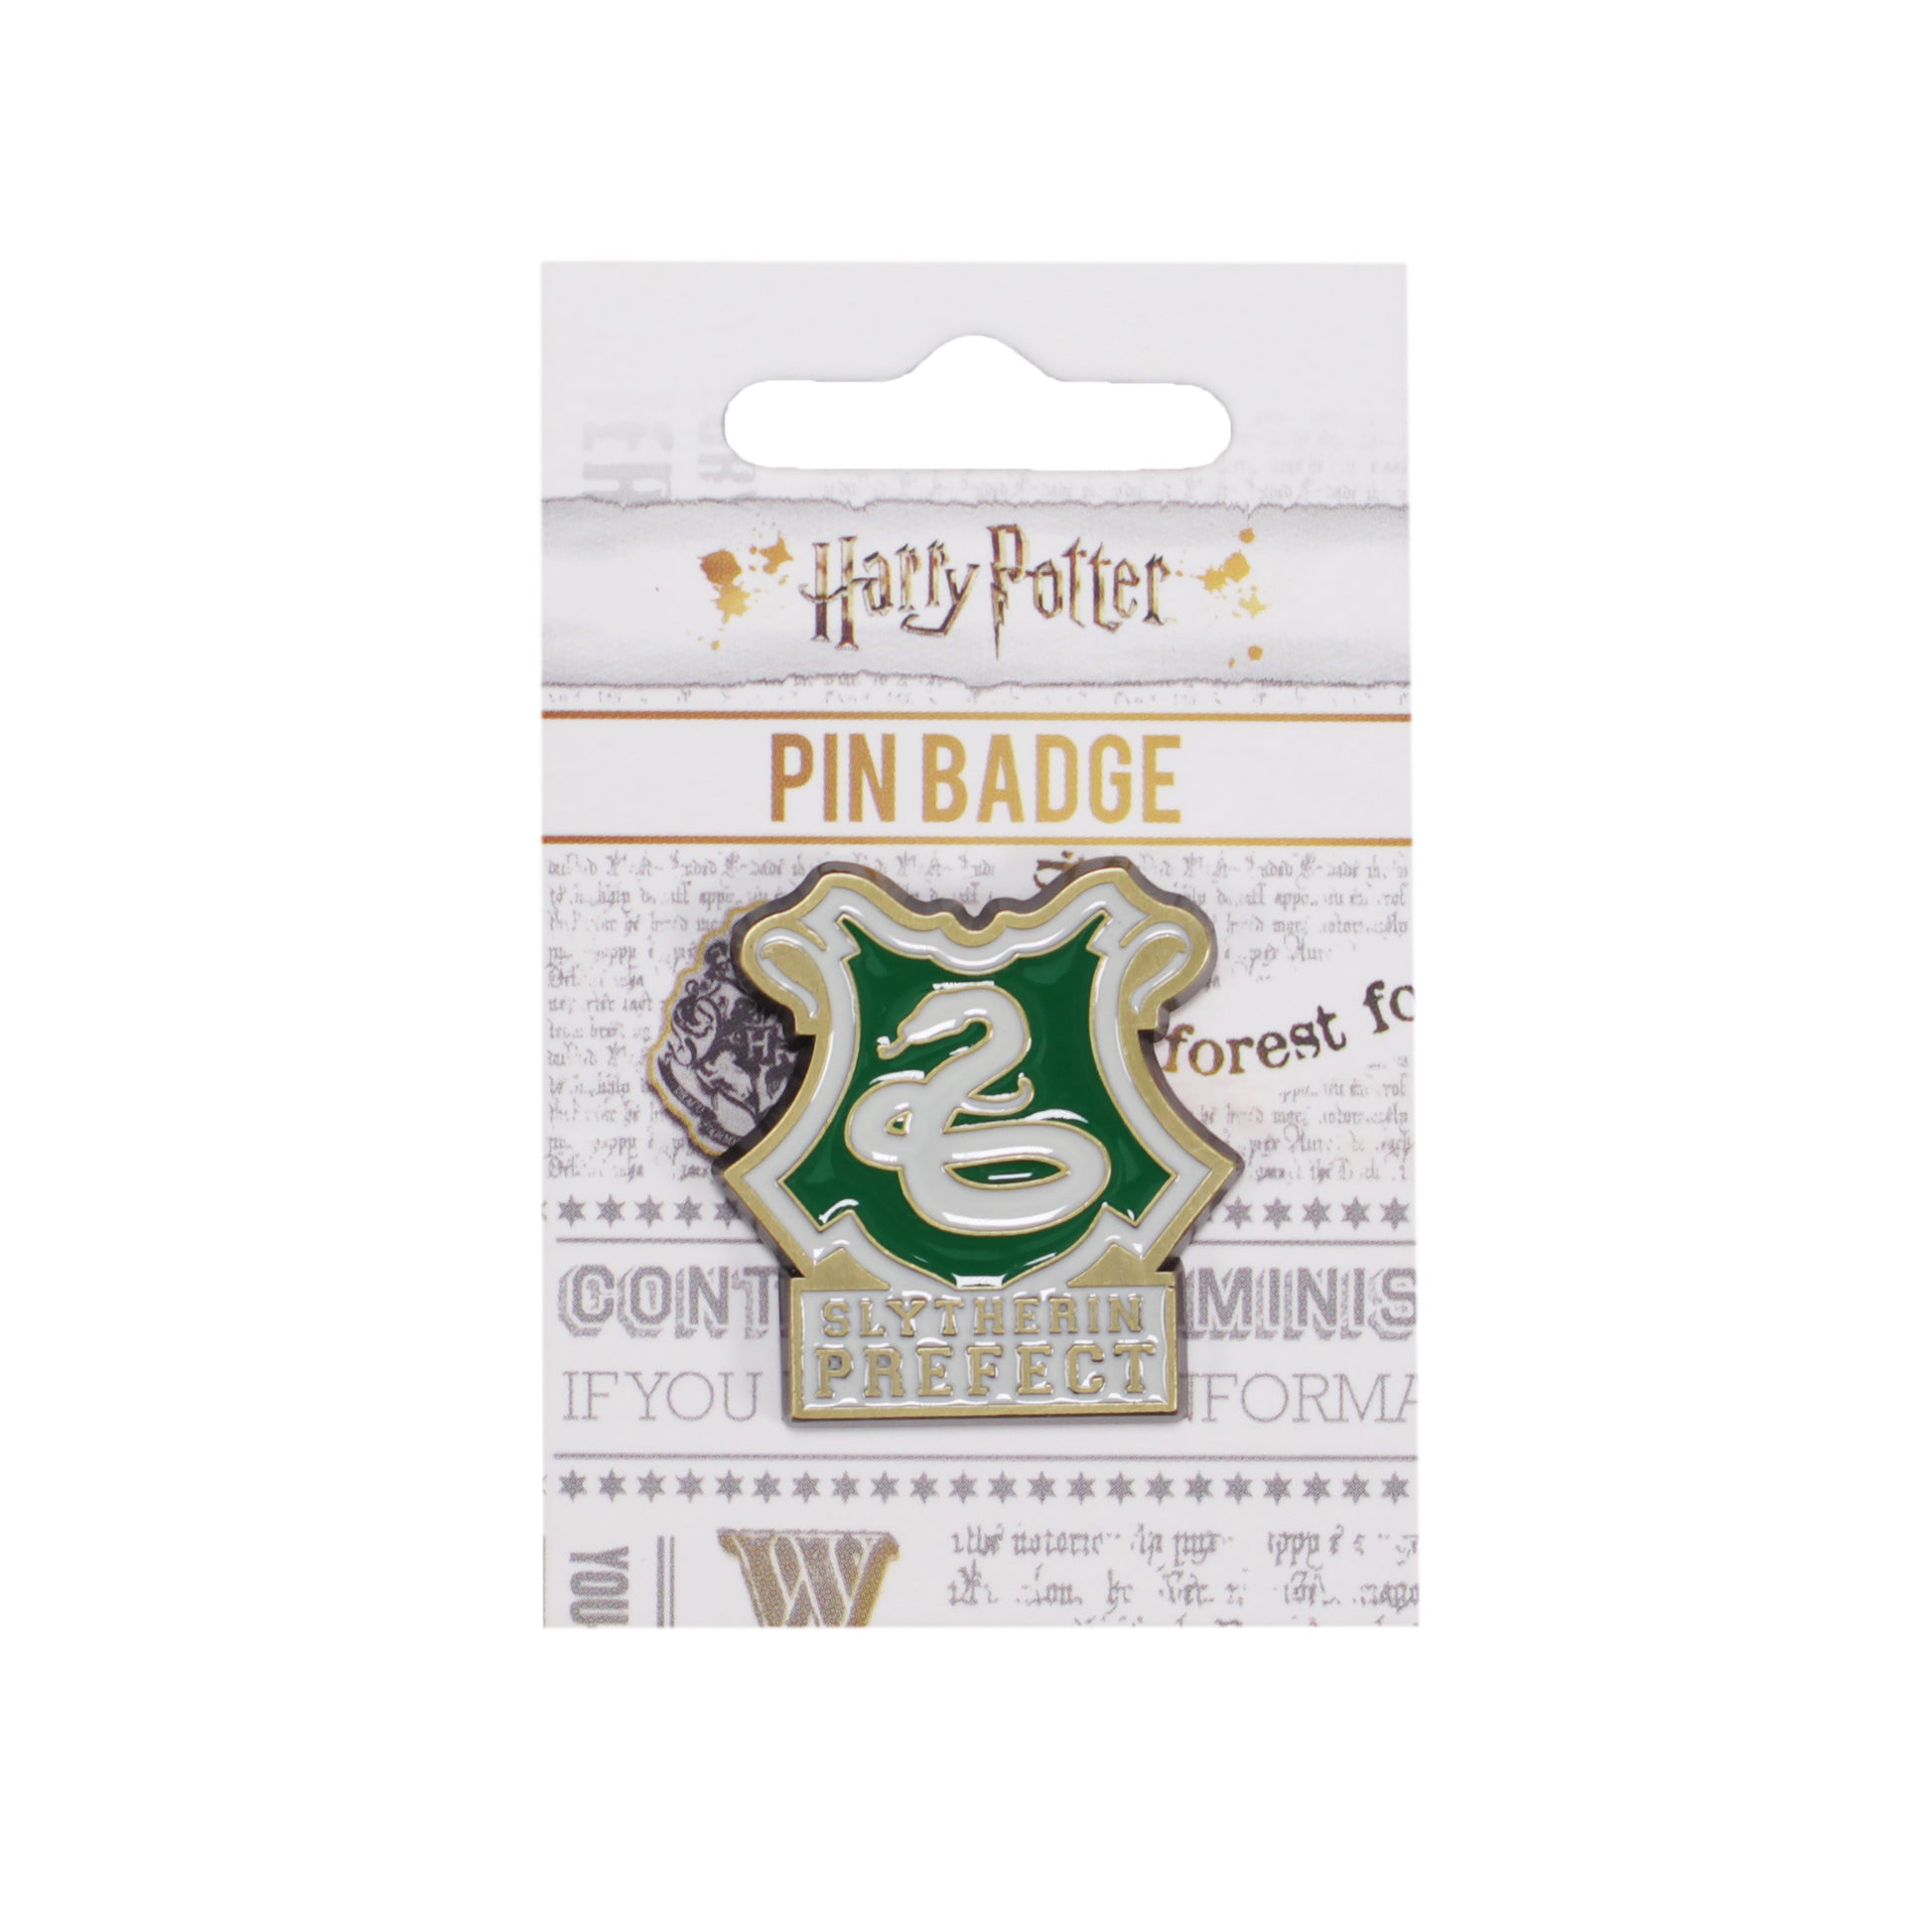 Harry Potter Official Merchandise Slytherin Prefect Pin Badge Harry Potter Merchandise